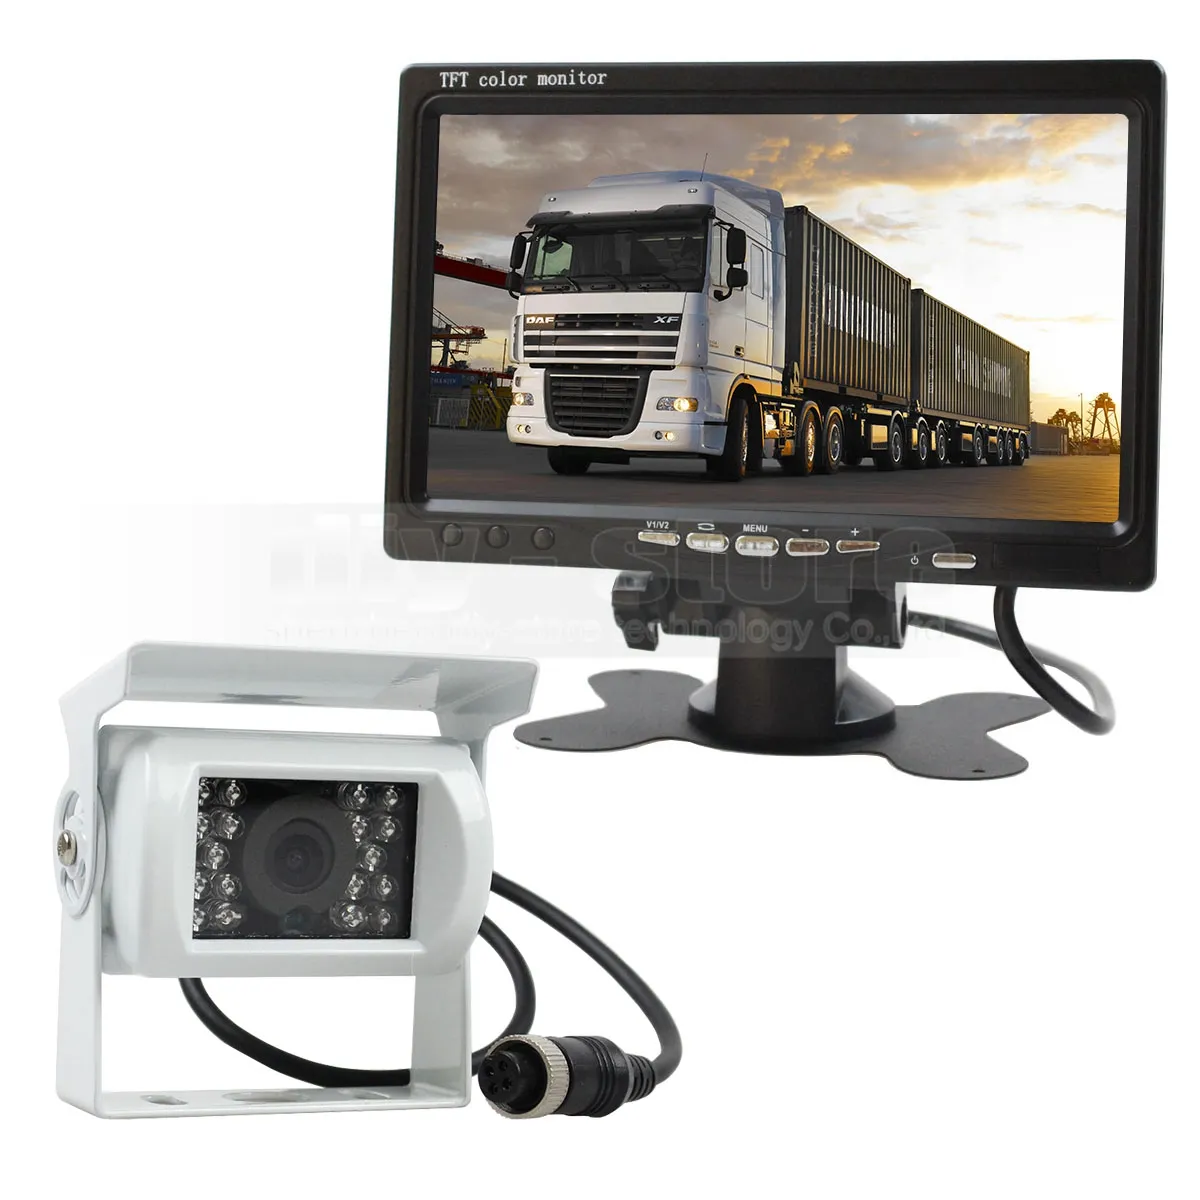 7inch TFT LCD Car Monitor White 4pin IR Night Vision CCD Rear View Camera for Bus Houseboat Truck330W